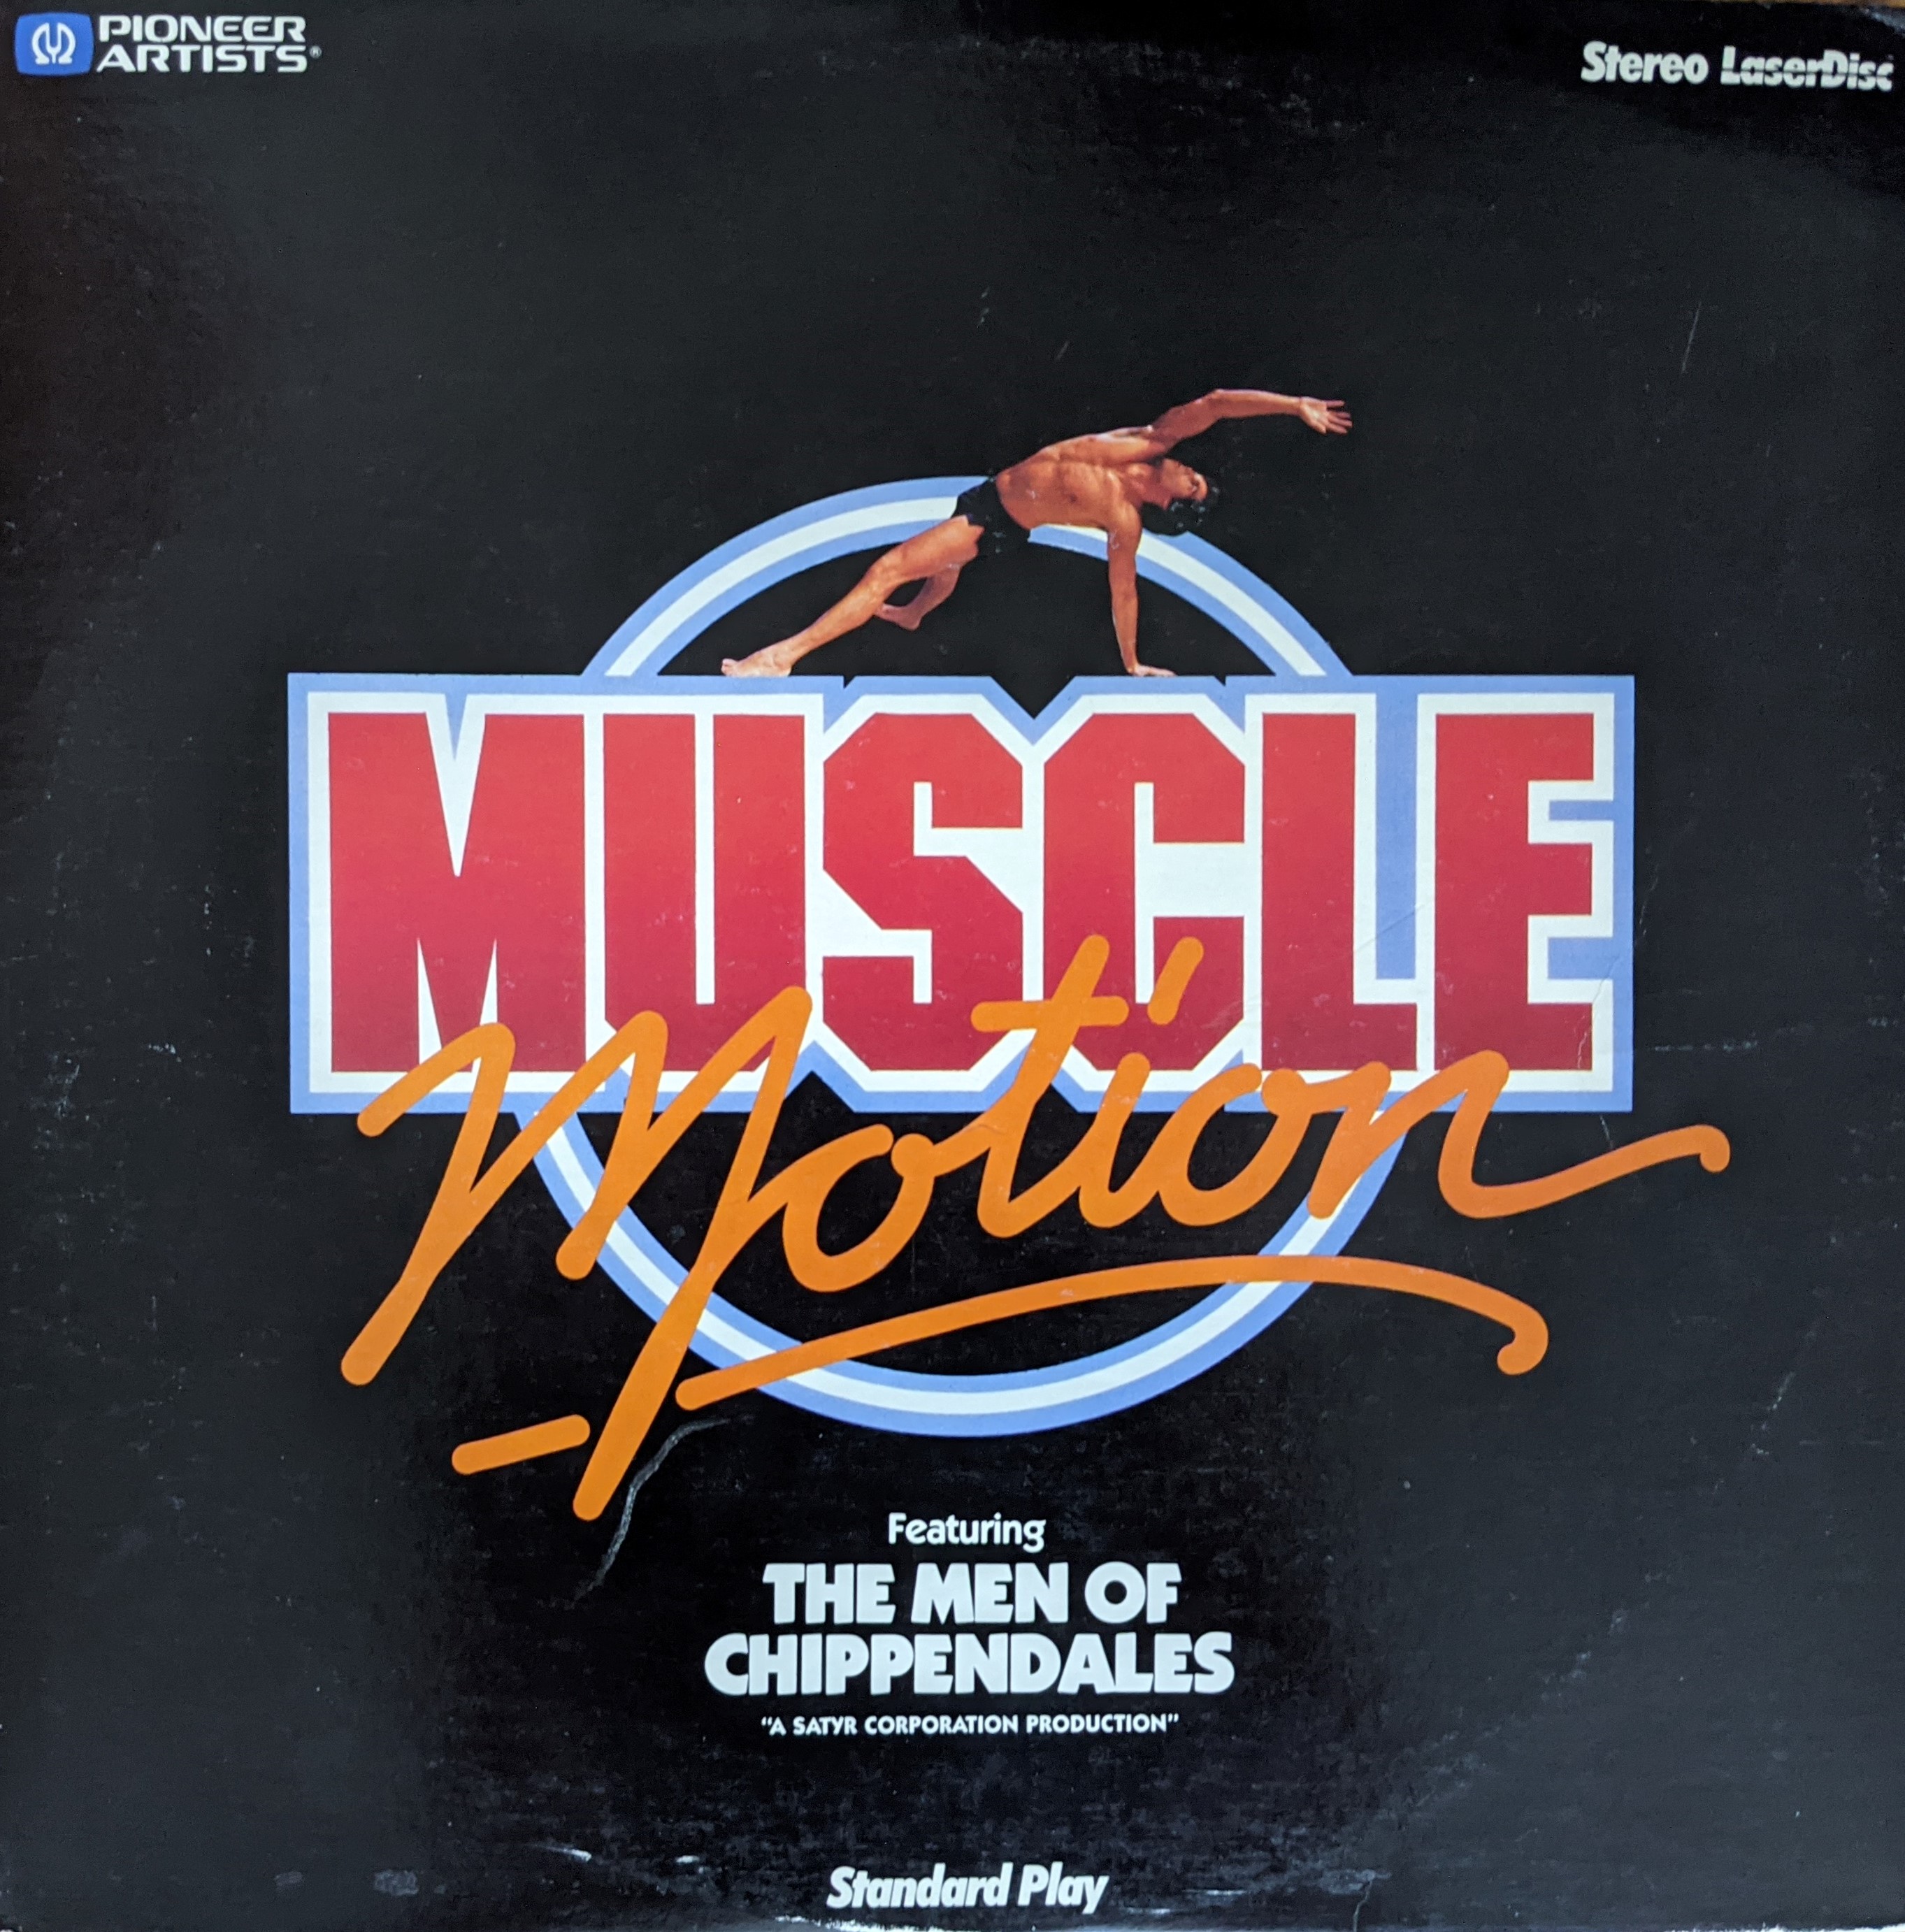 Muscle Motion